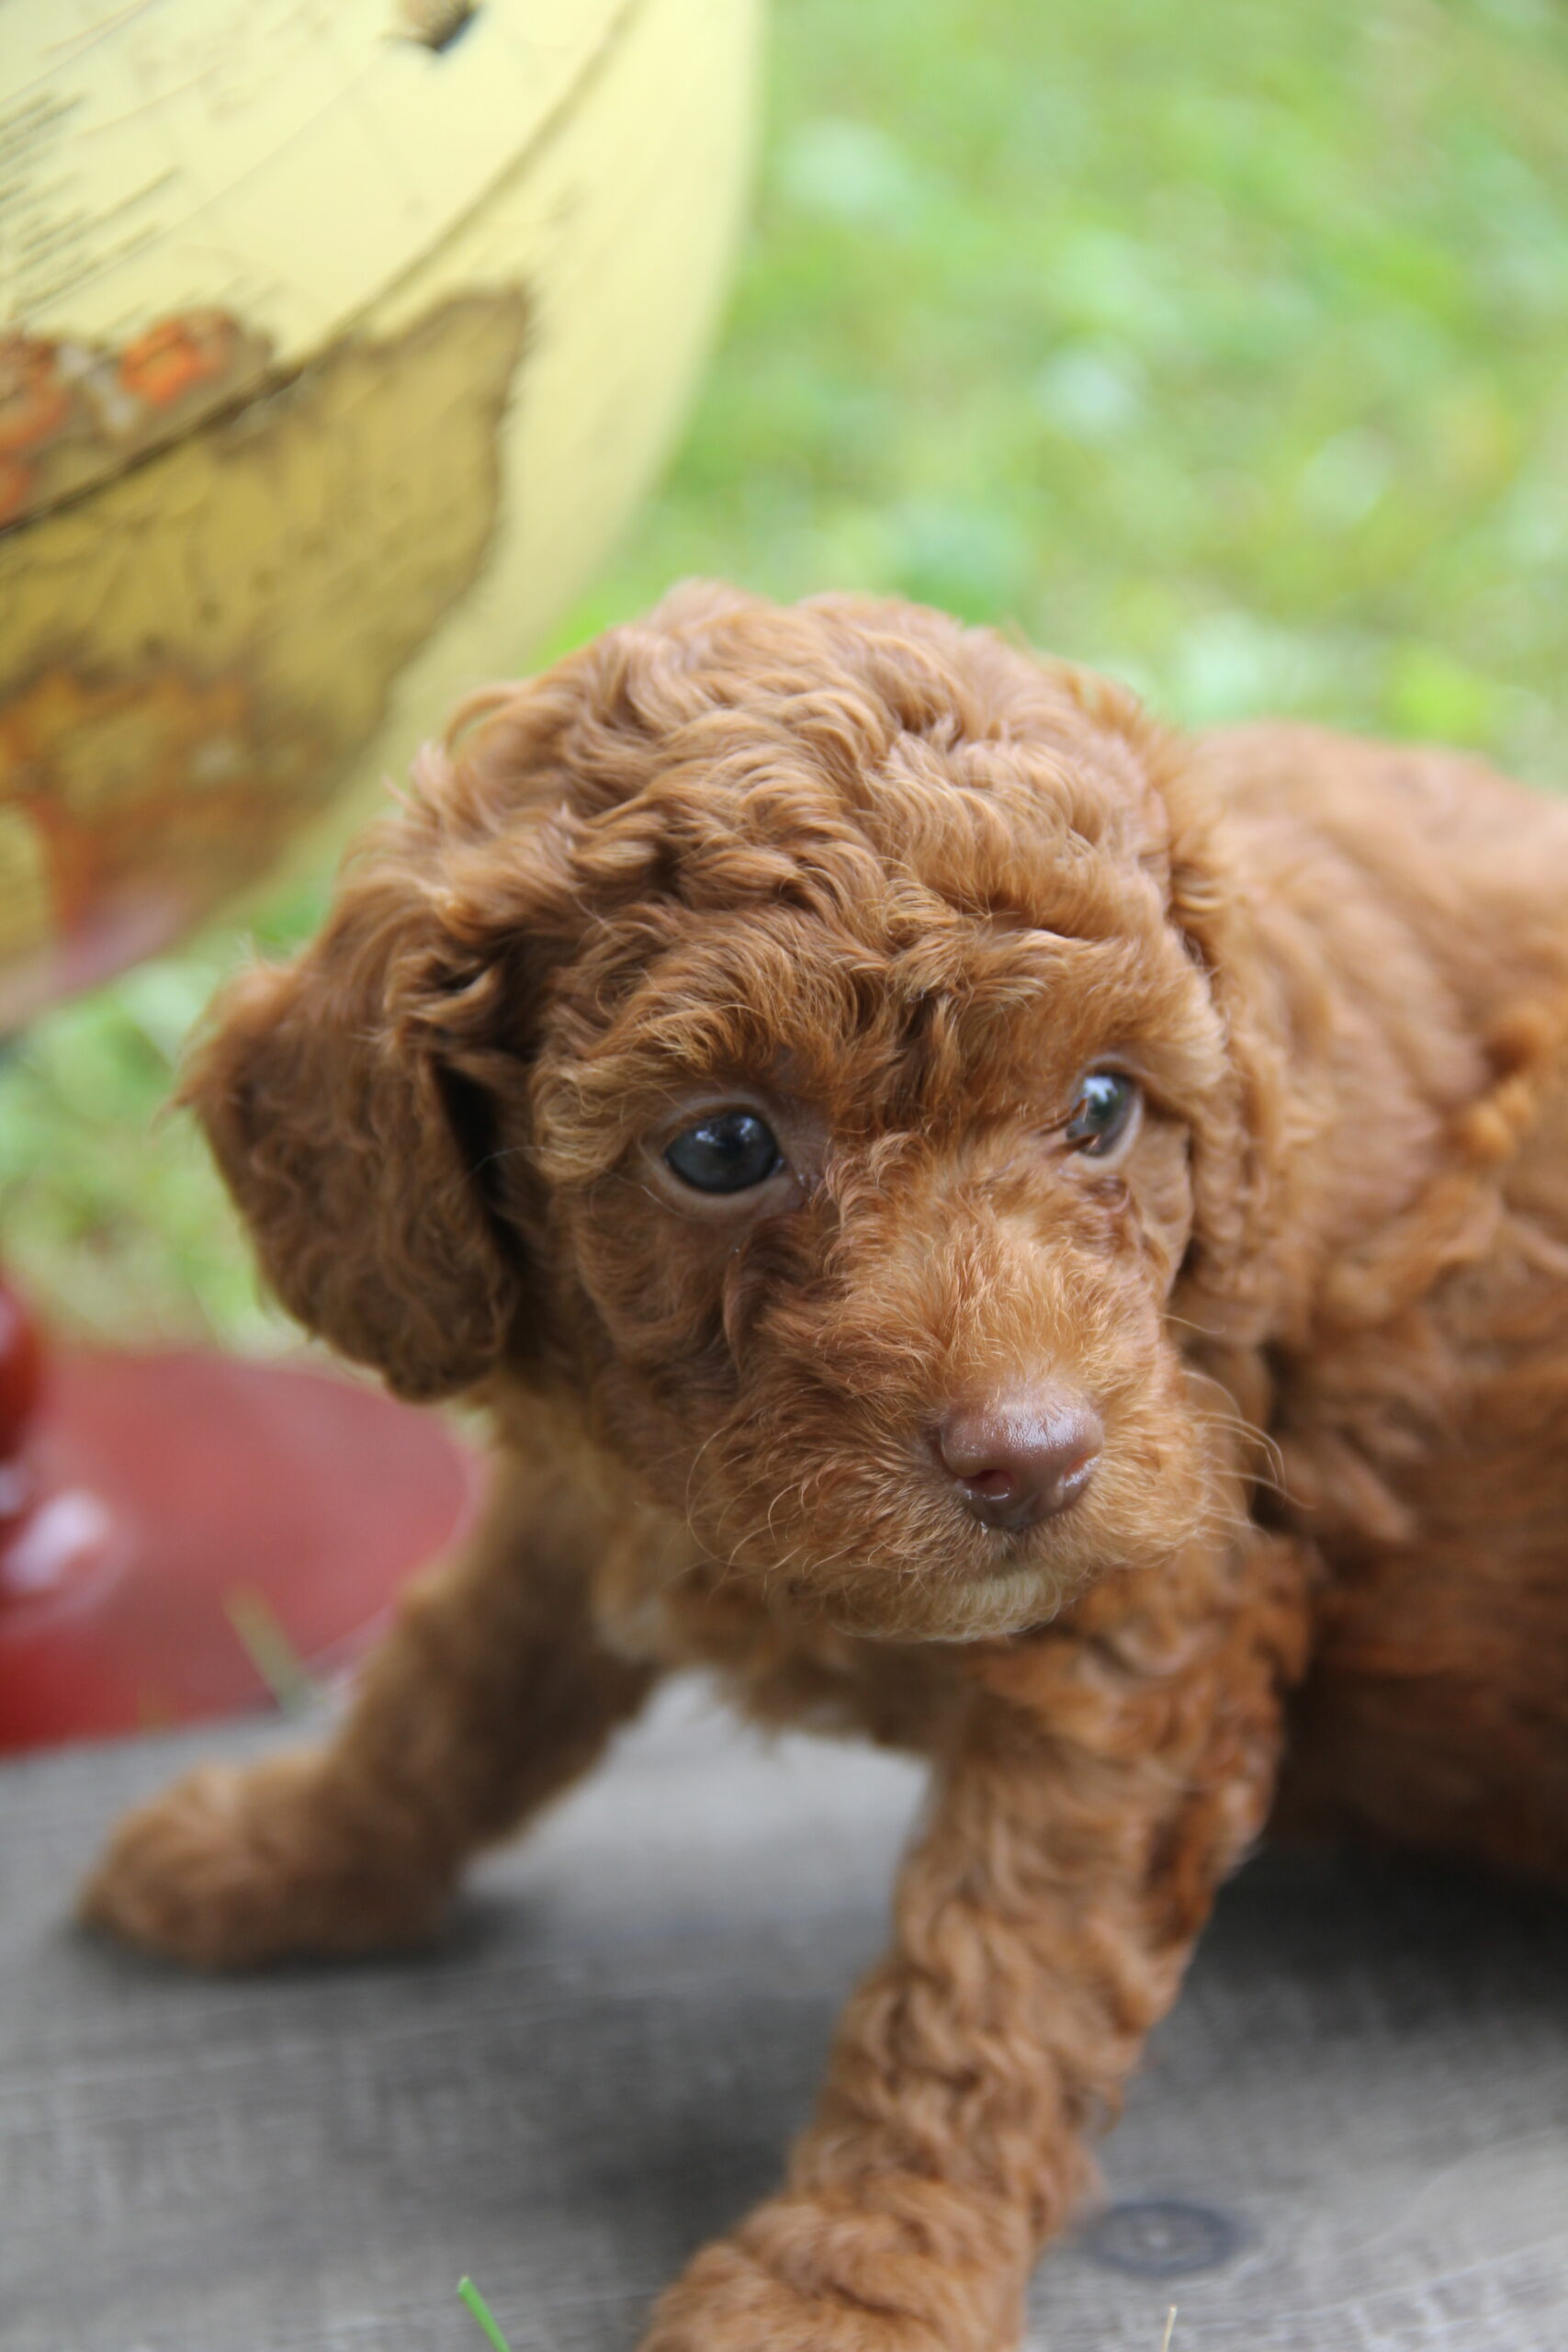 Toy Poodle - Training Course on Toy Poodle